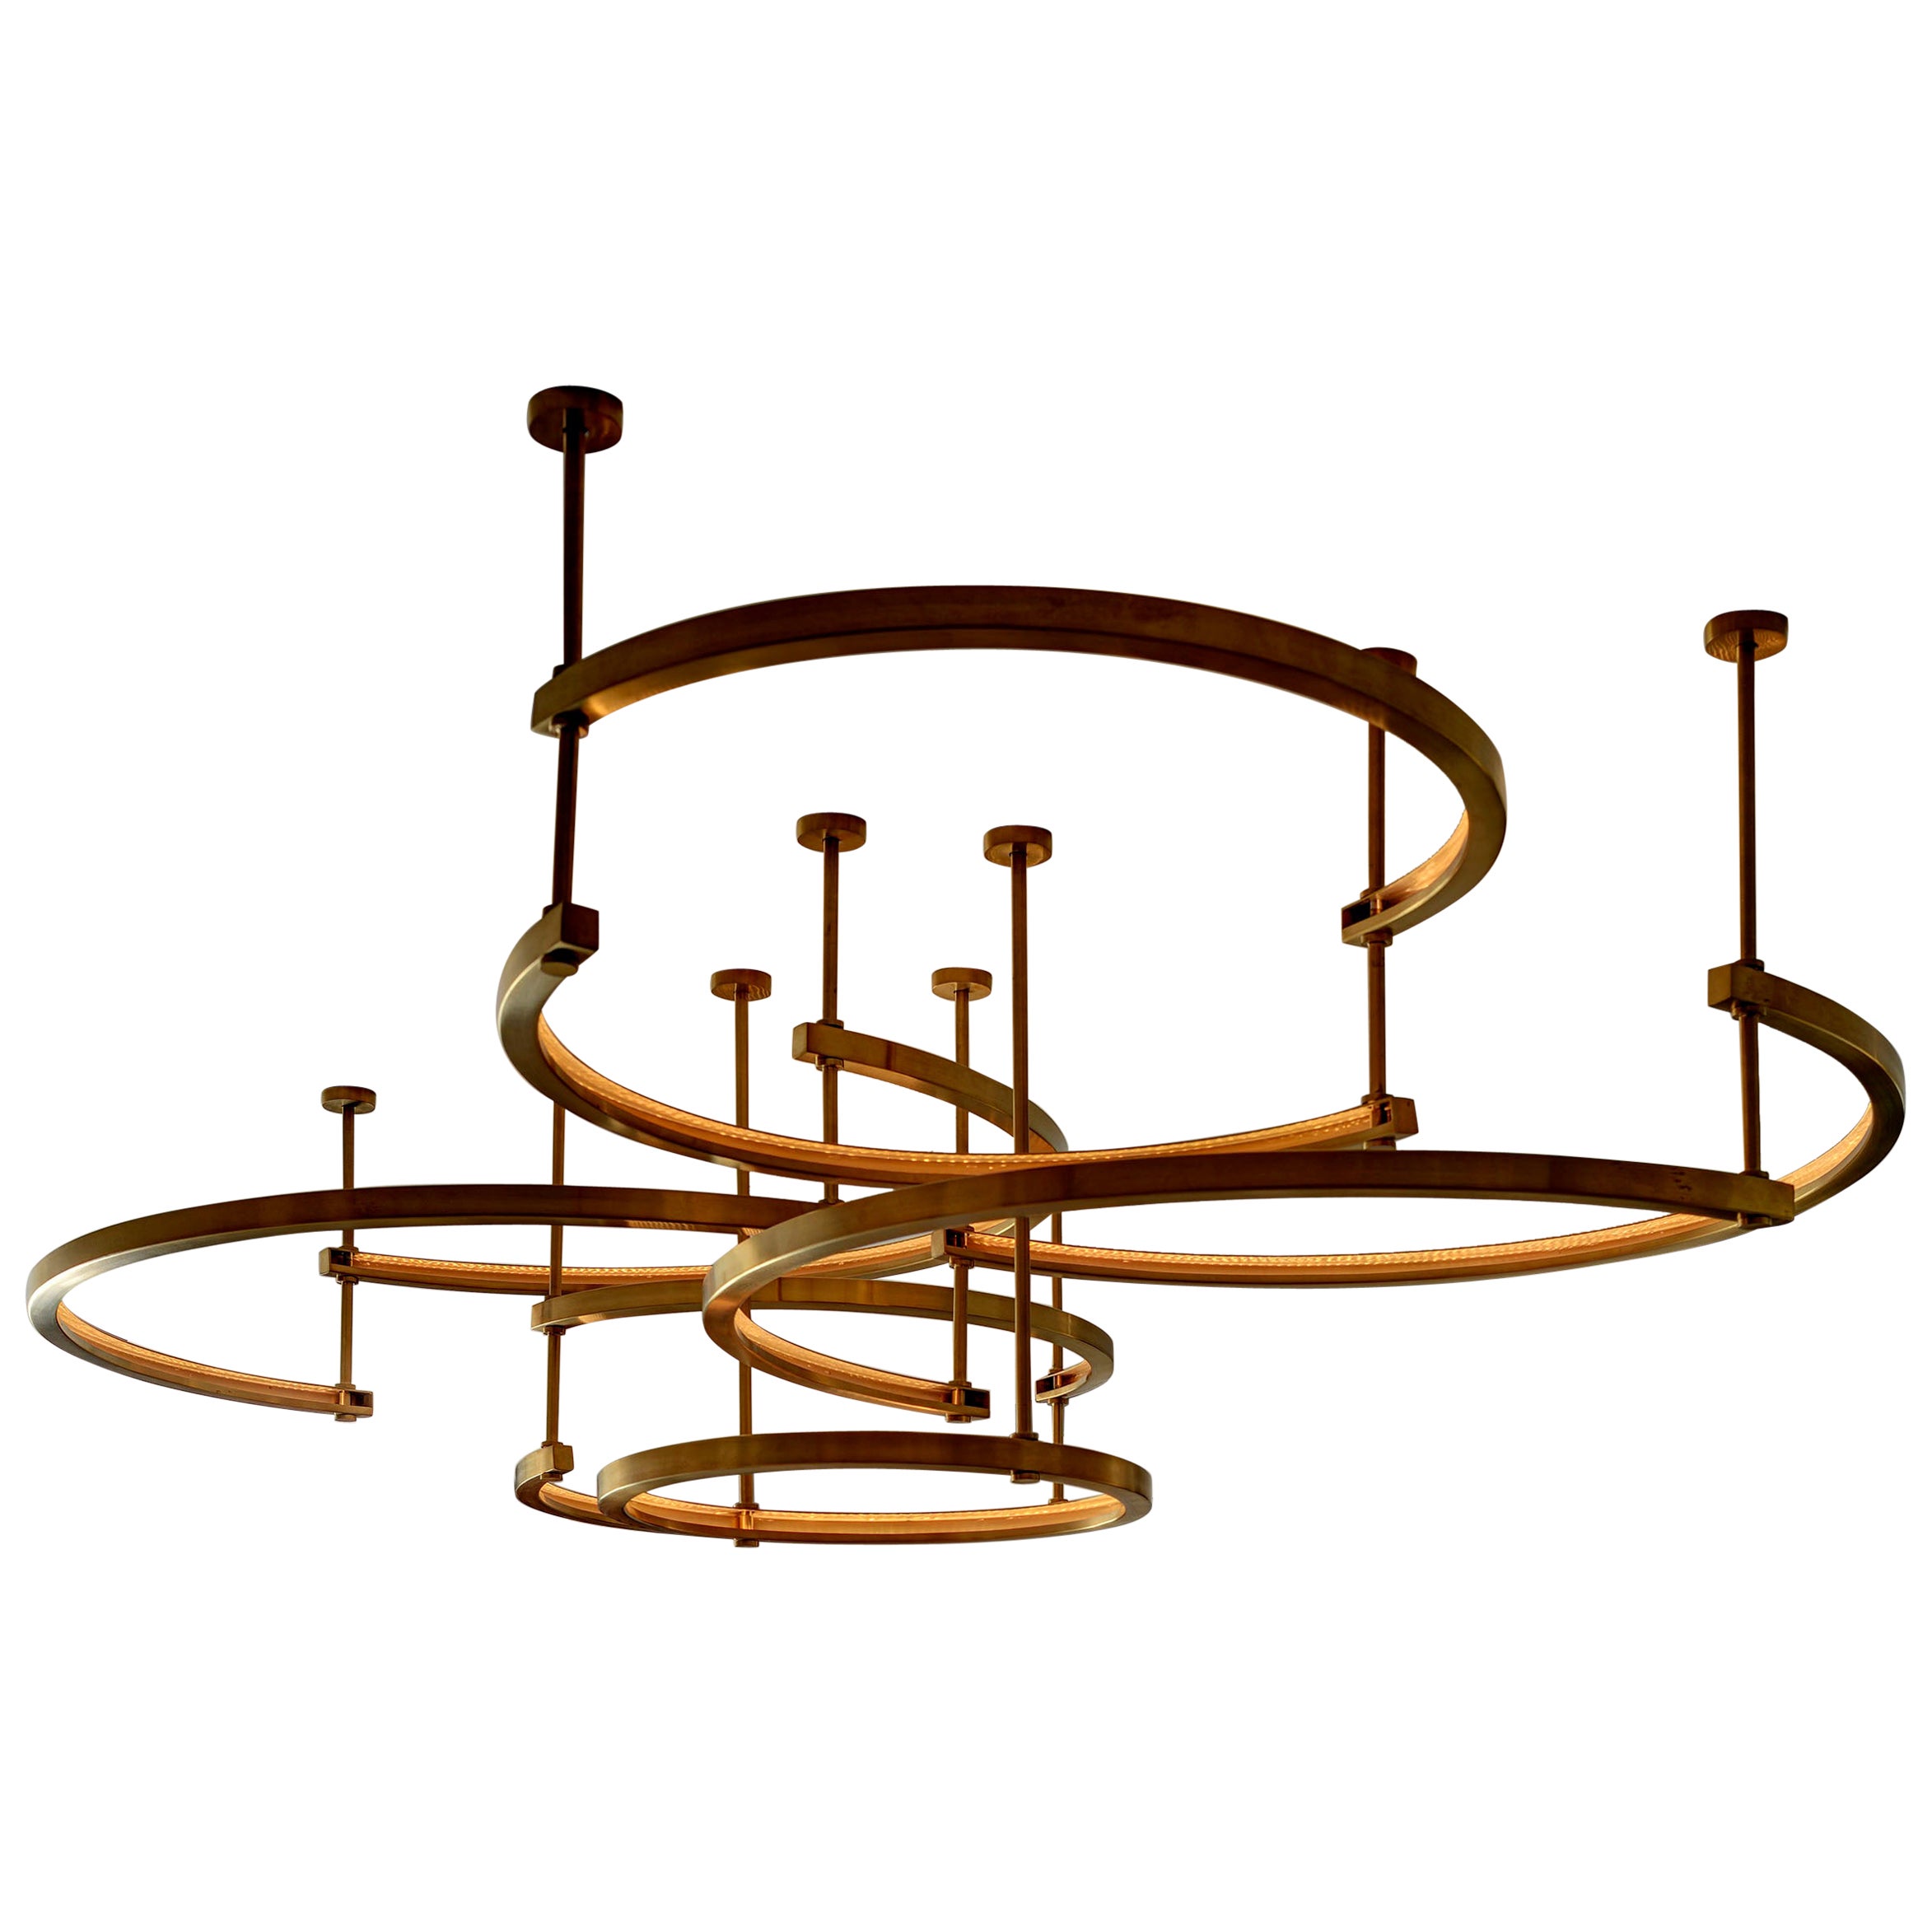 The Deconstructed Brass Ring Chandelier